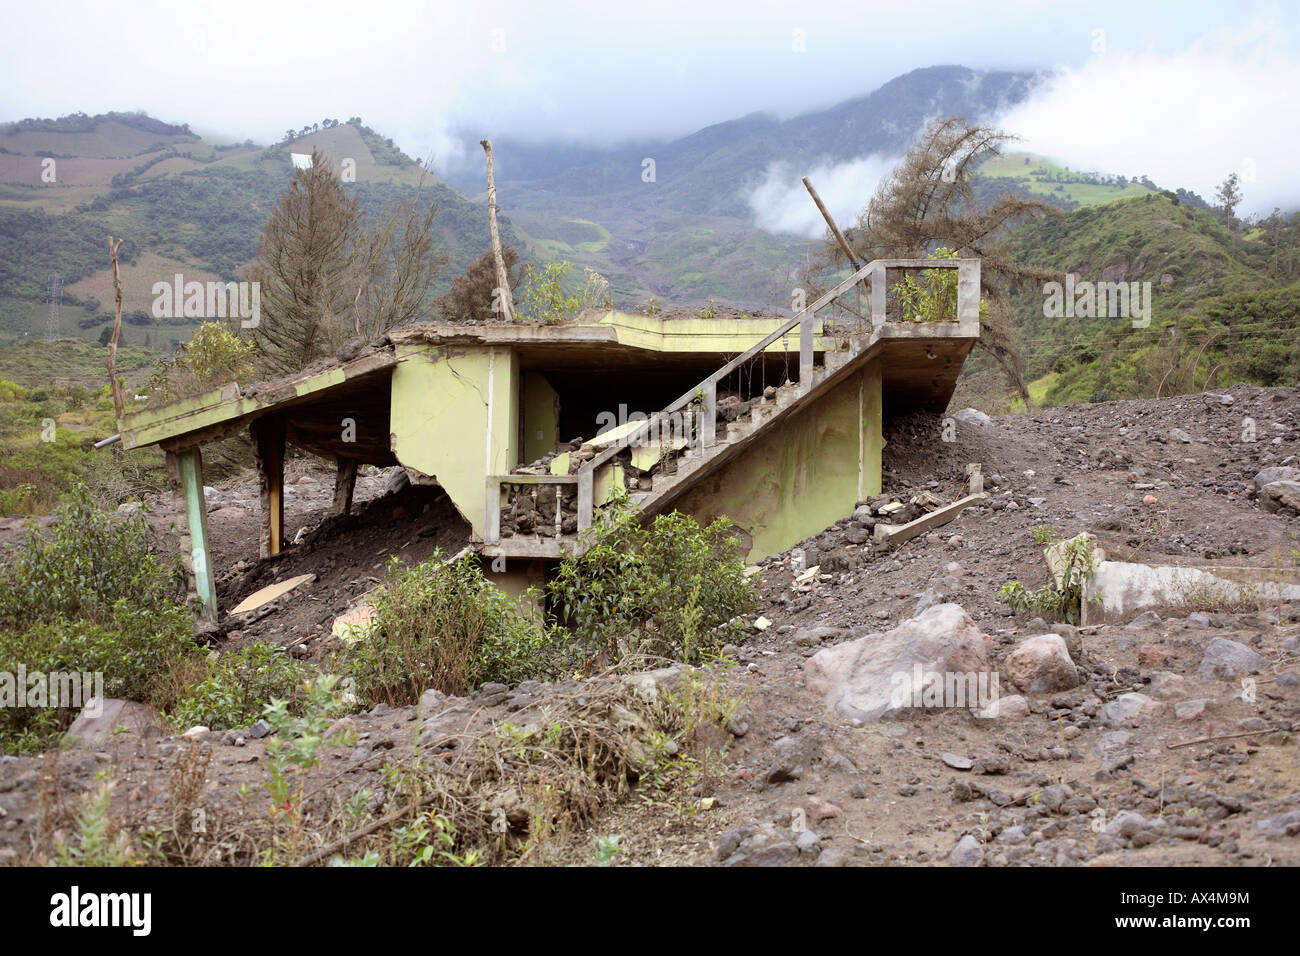 House buried in a lahar or mudflow on the slopes of Tunguragua Volcano, Ecuador Stock Photo